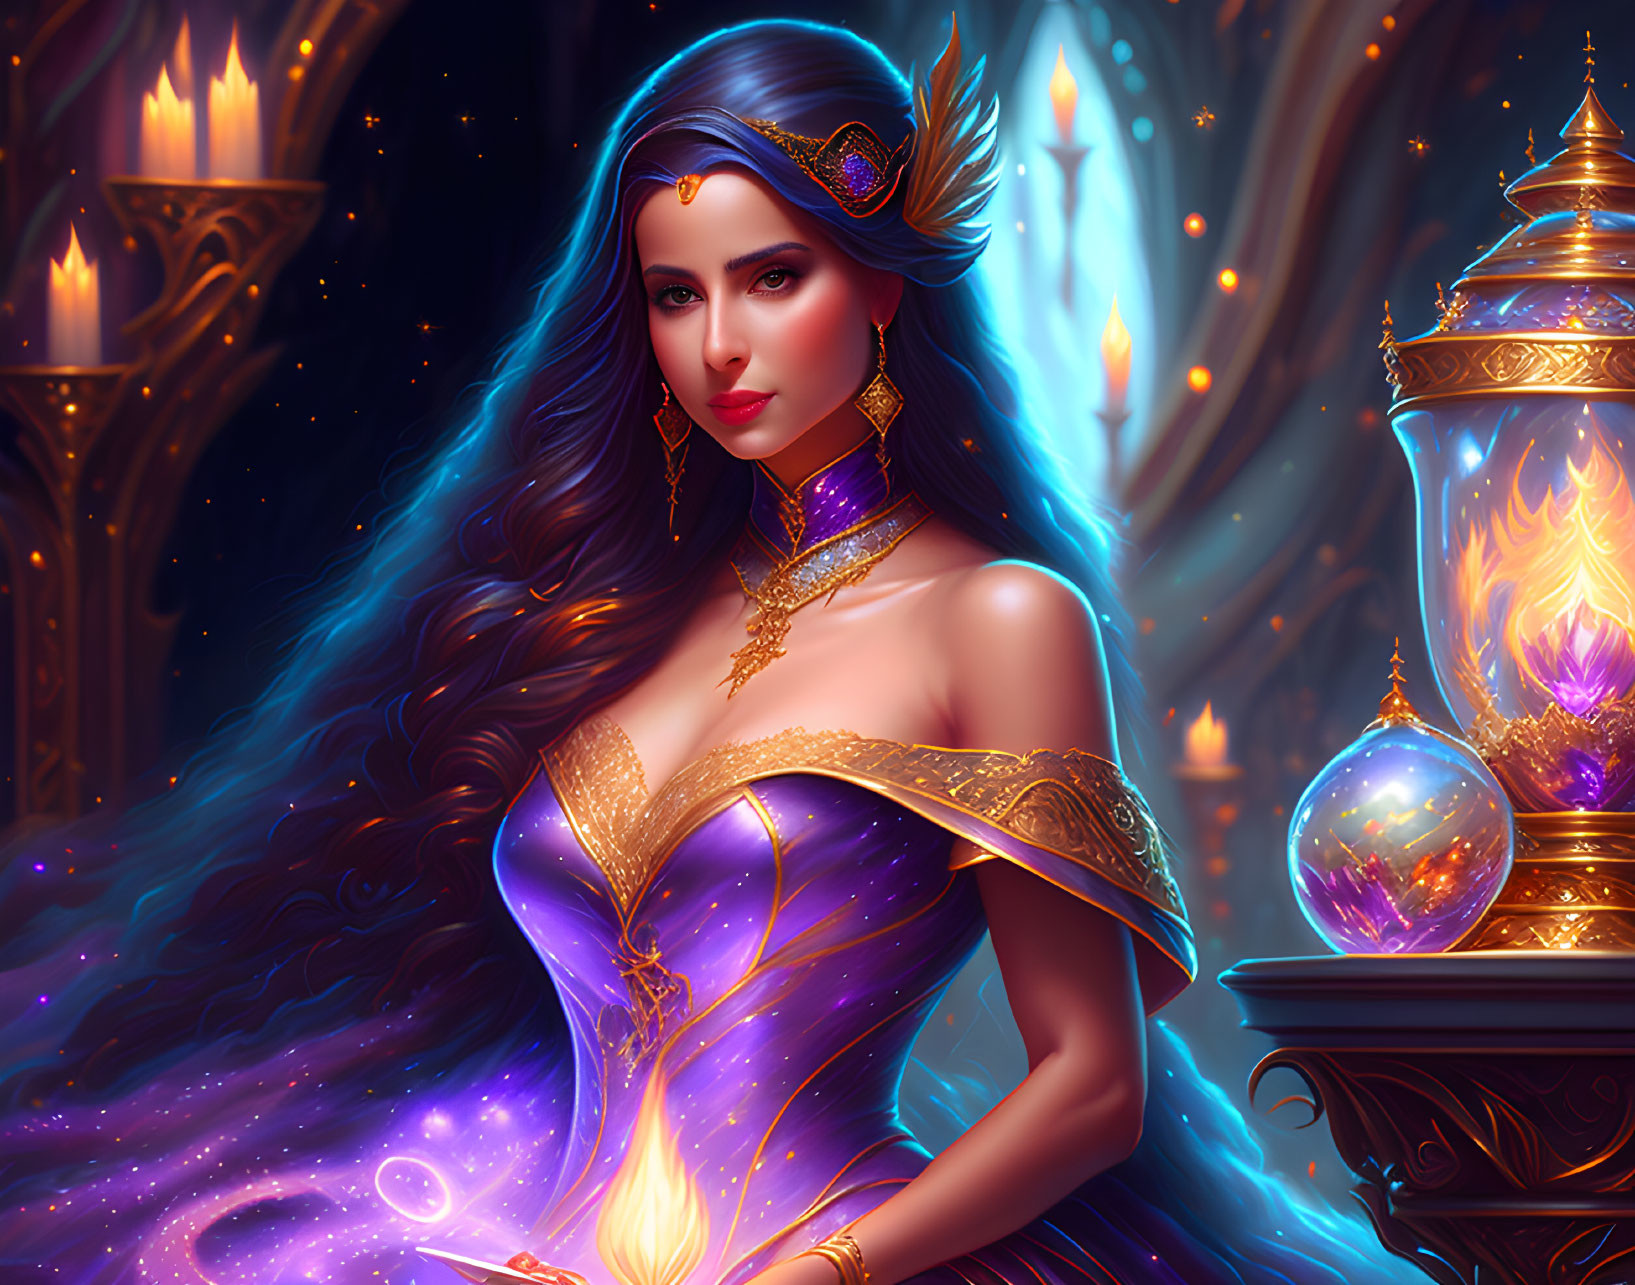 Illustrated fantasy woman with long wavy hair in purple dress next to glowing candles and mystical orb